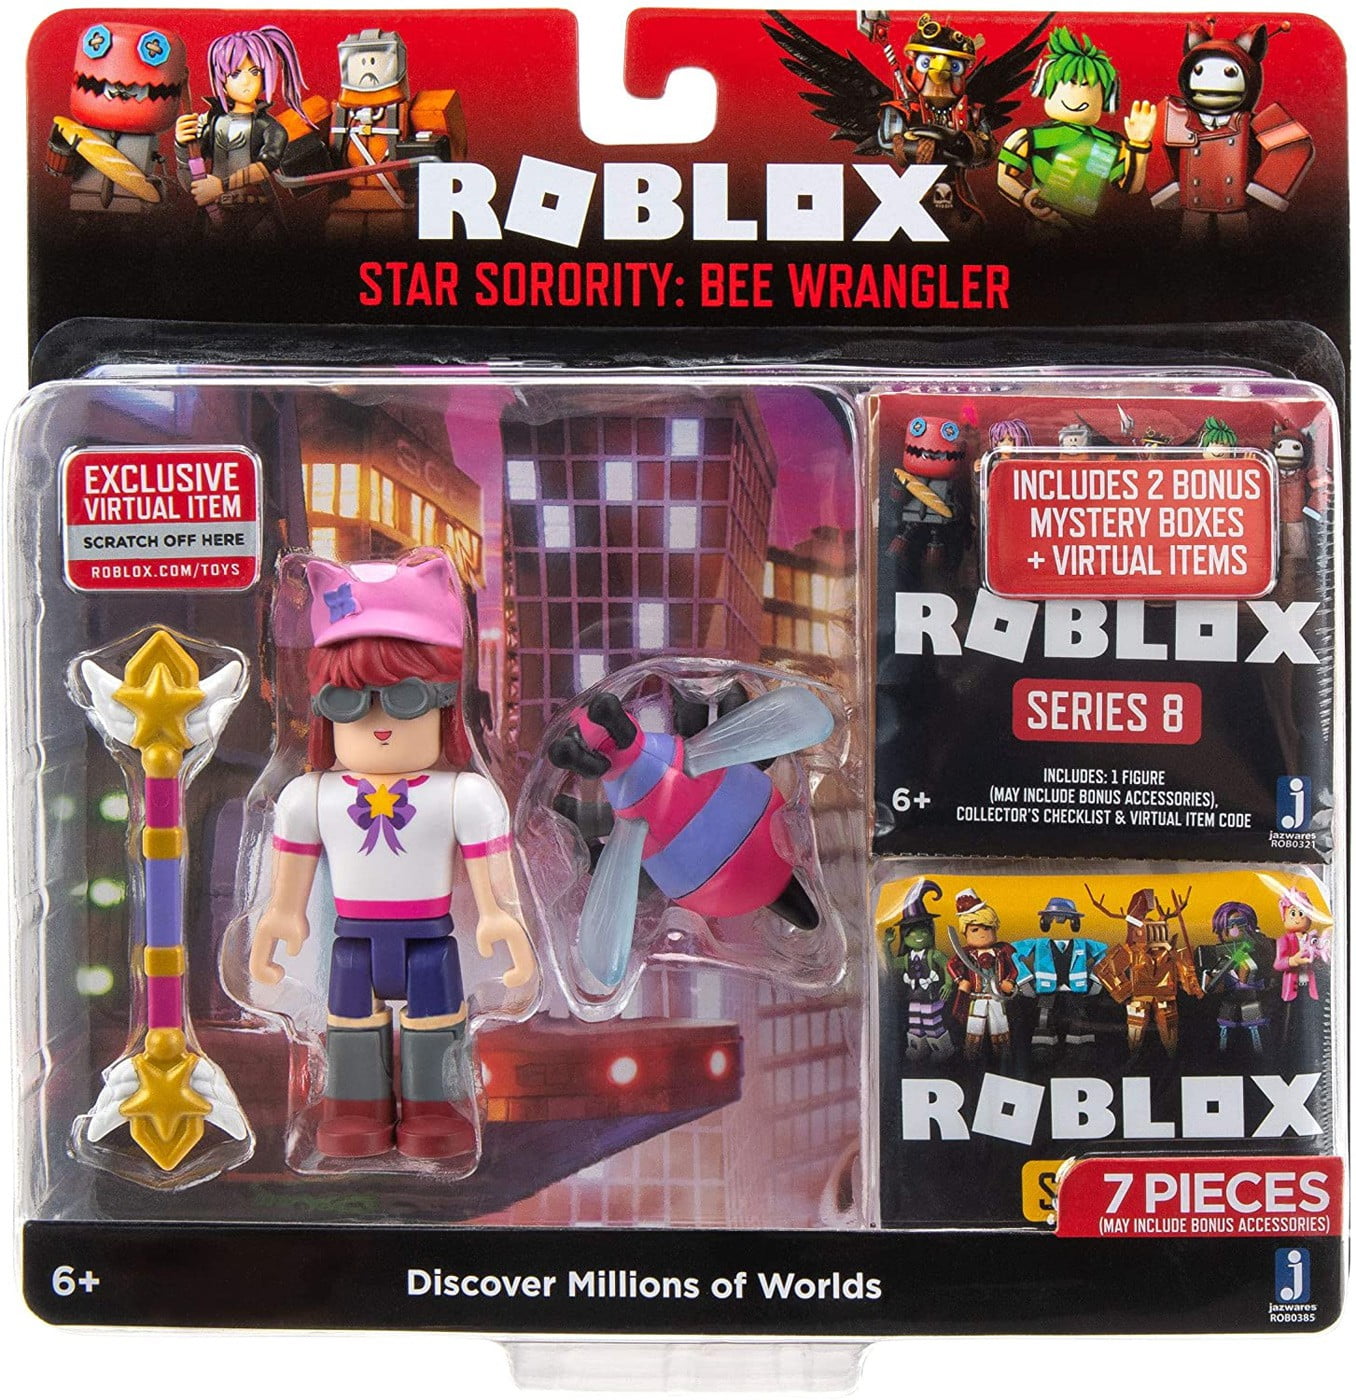 Roblox - Adopt Me: Pet Store Playset Includes Exclusive Virtual Item New